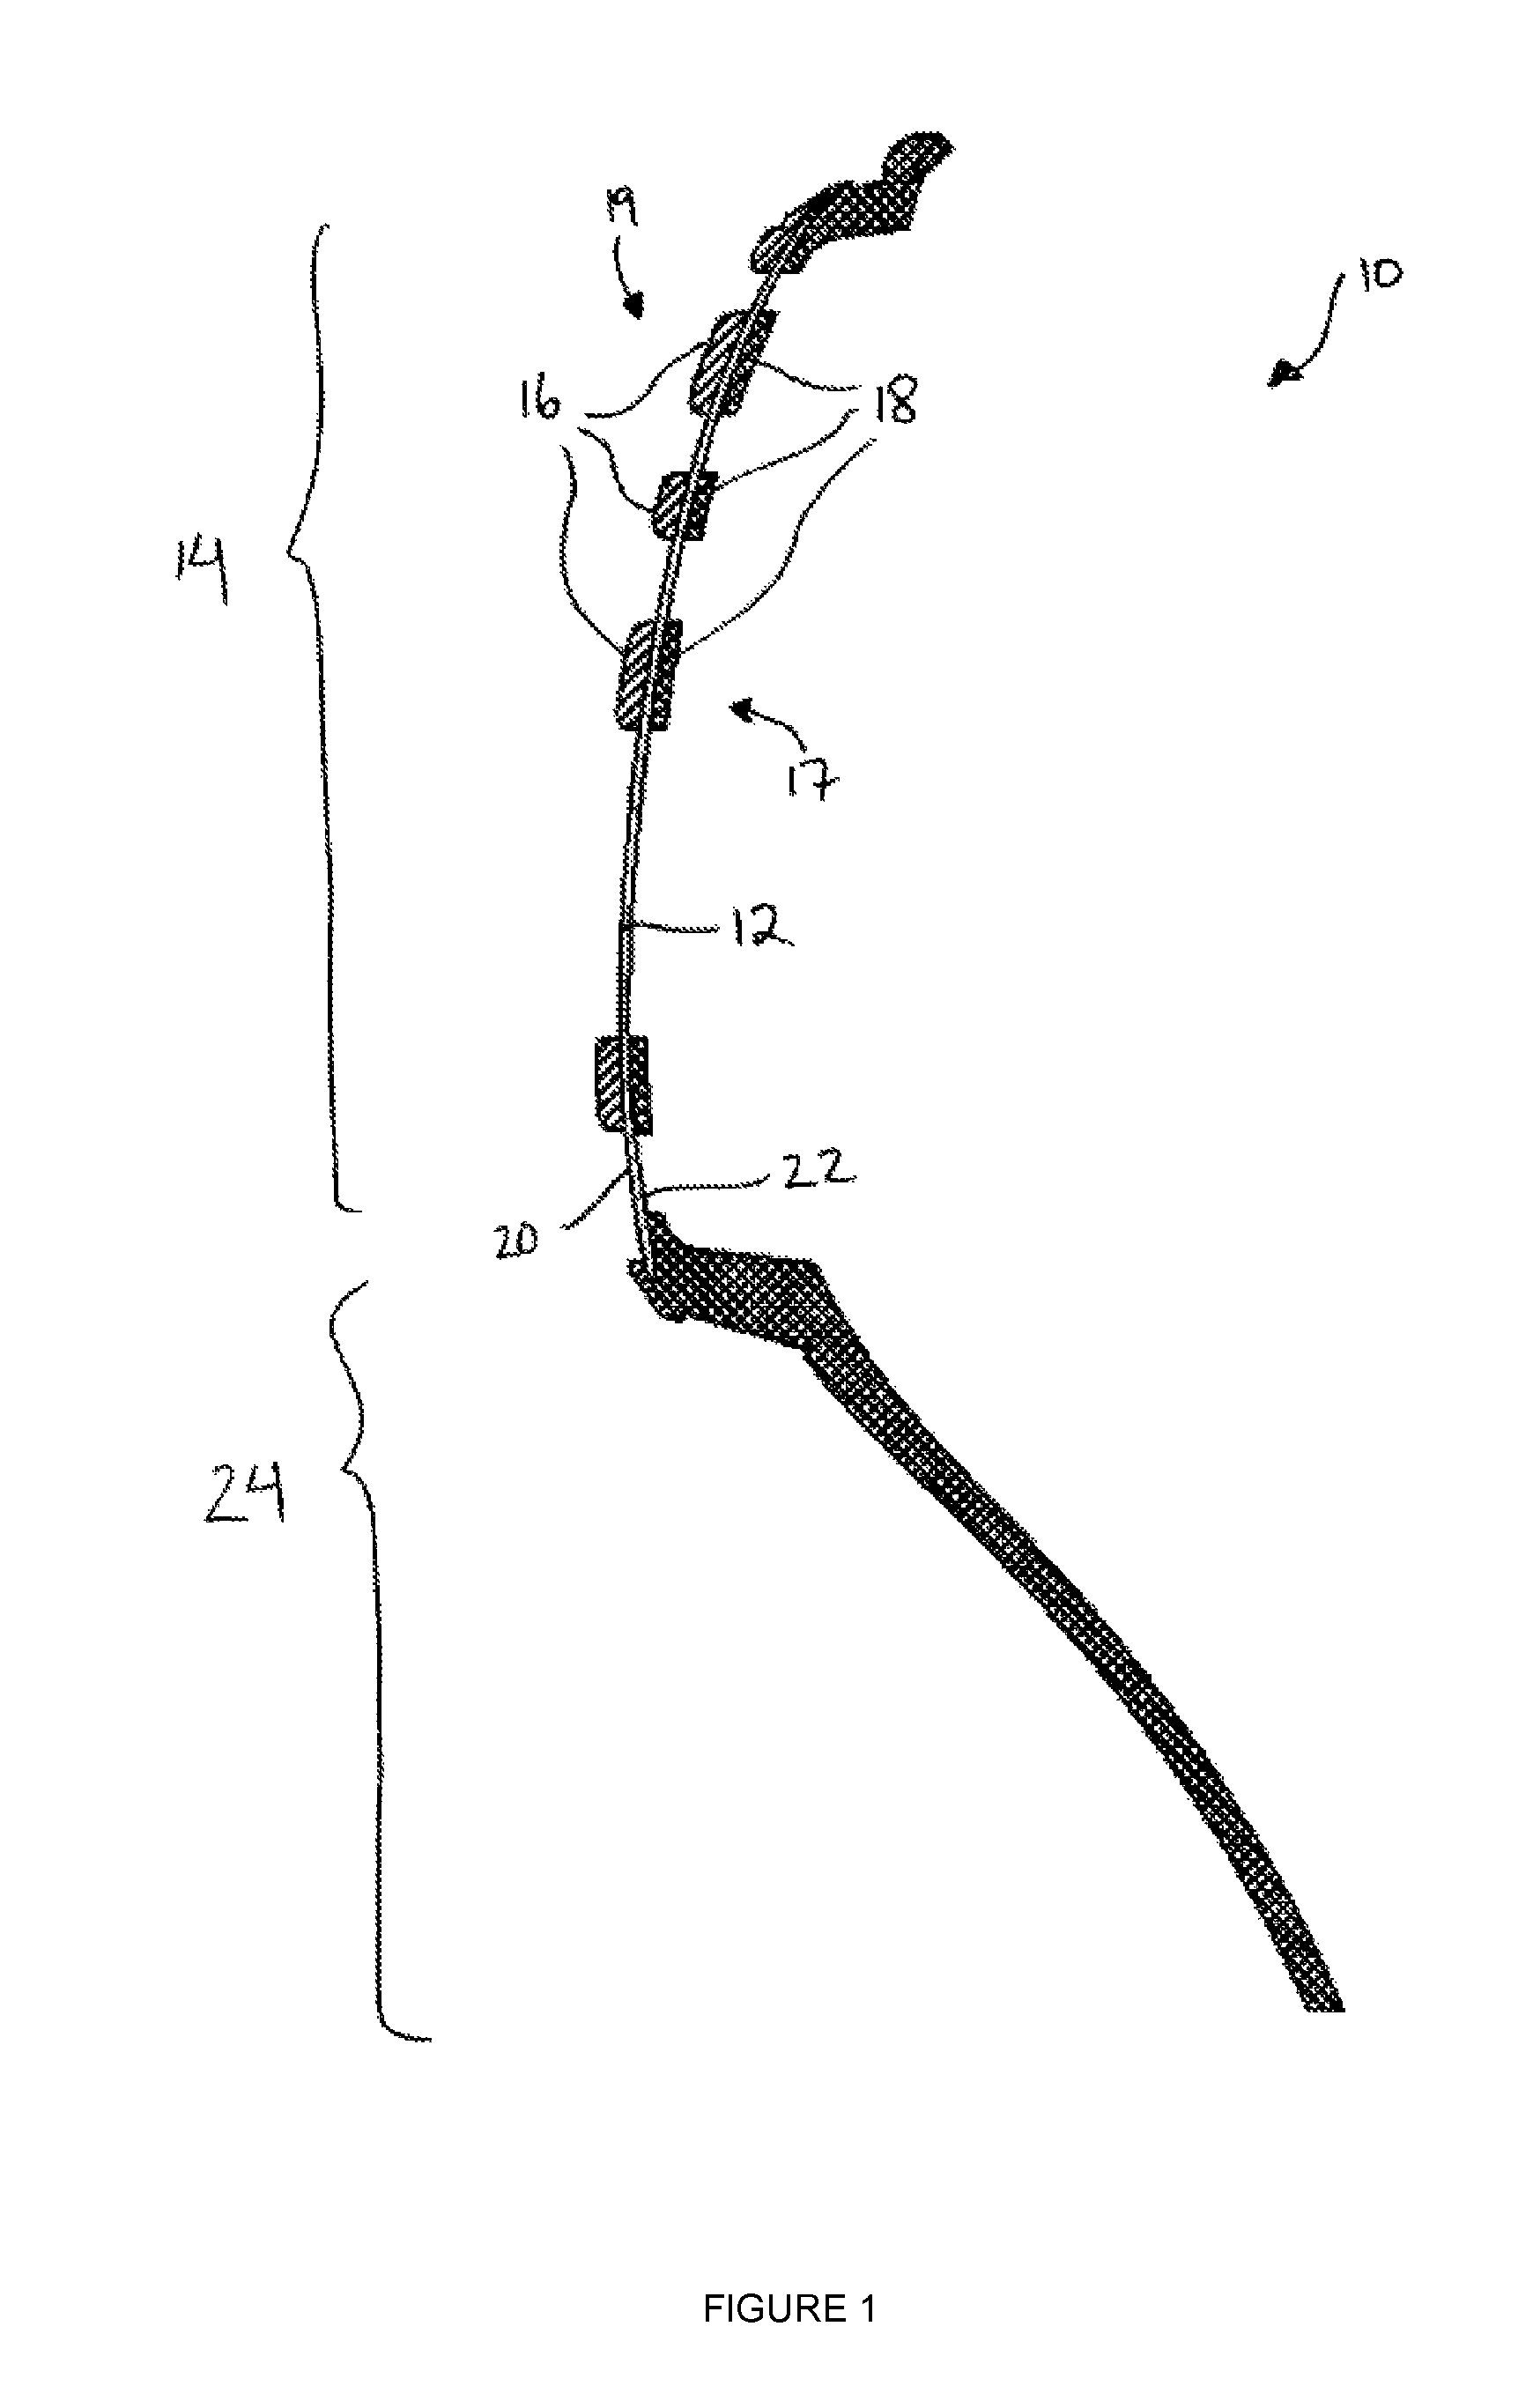 System and method for forming a shoe sole